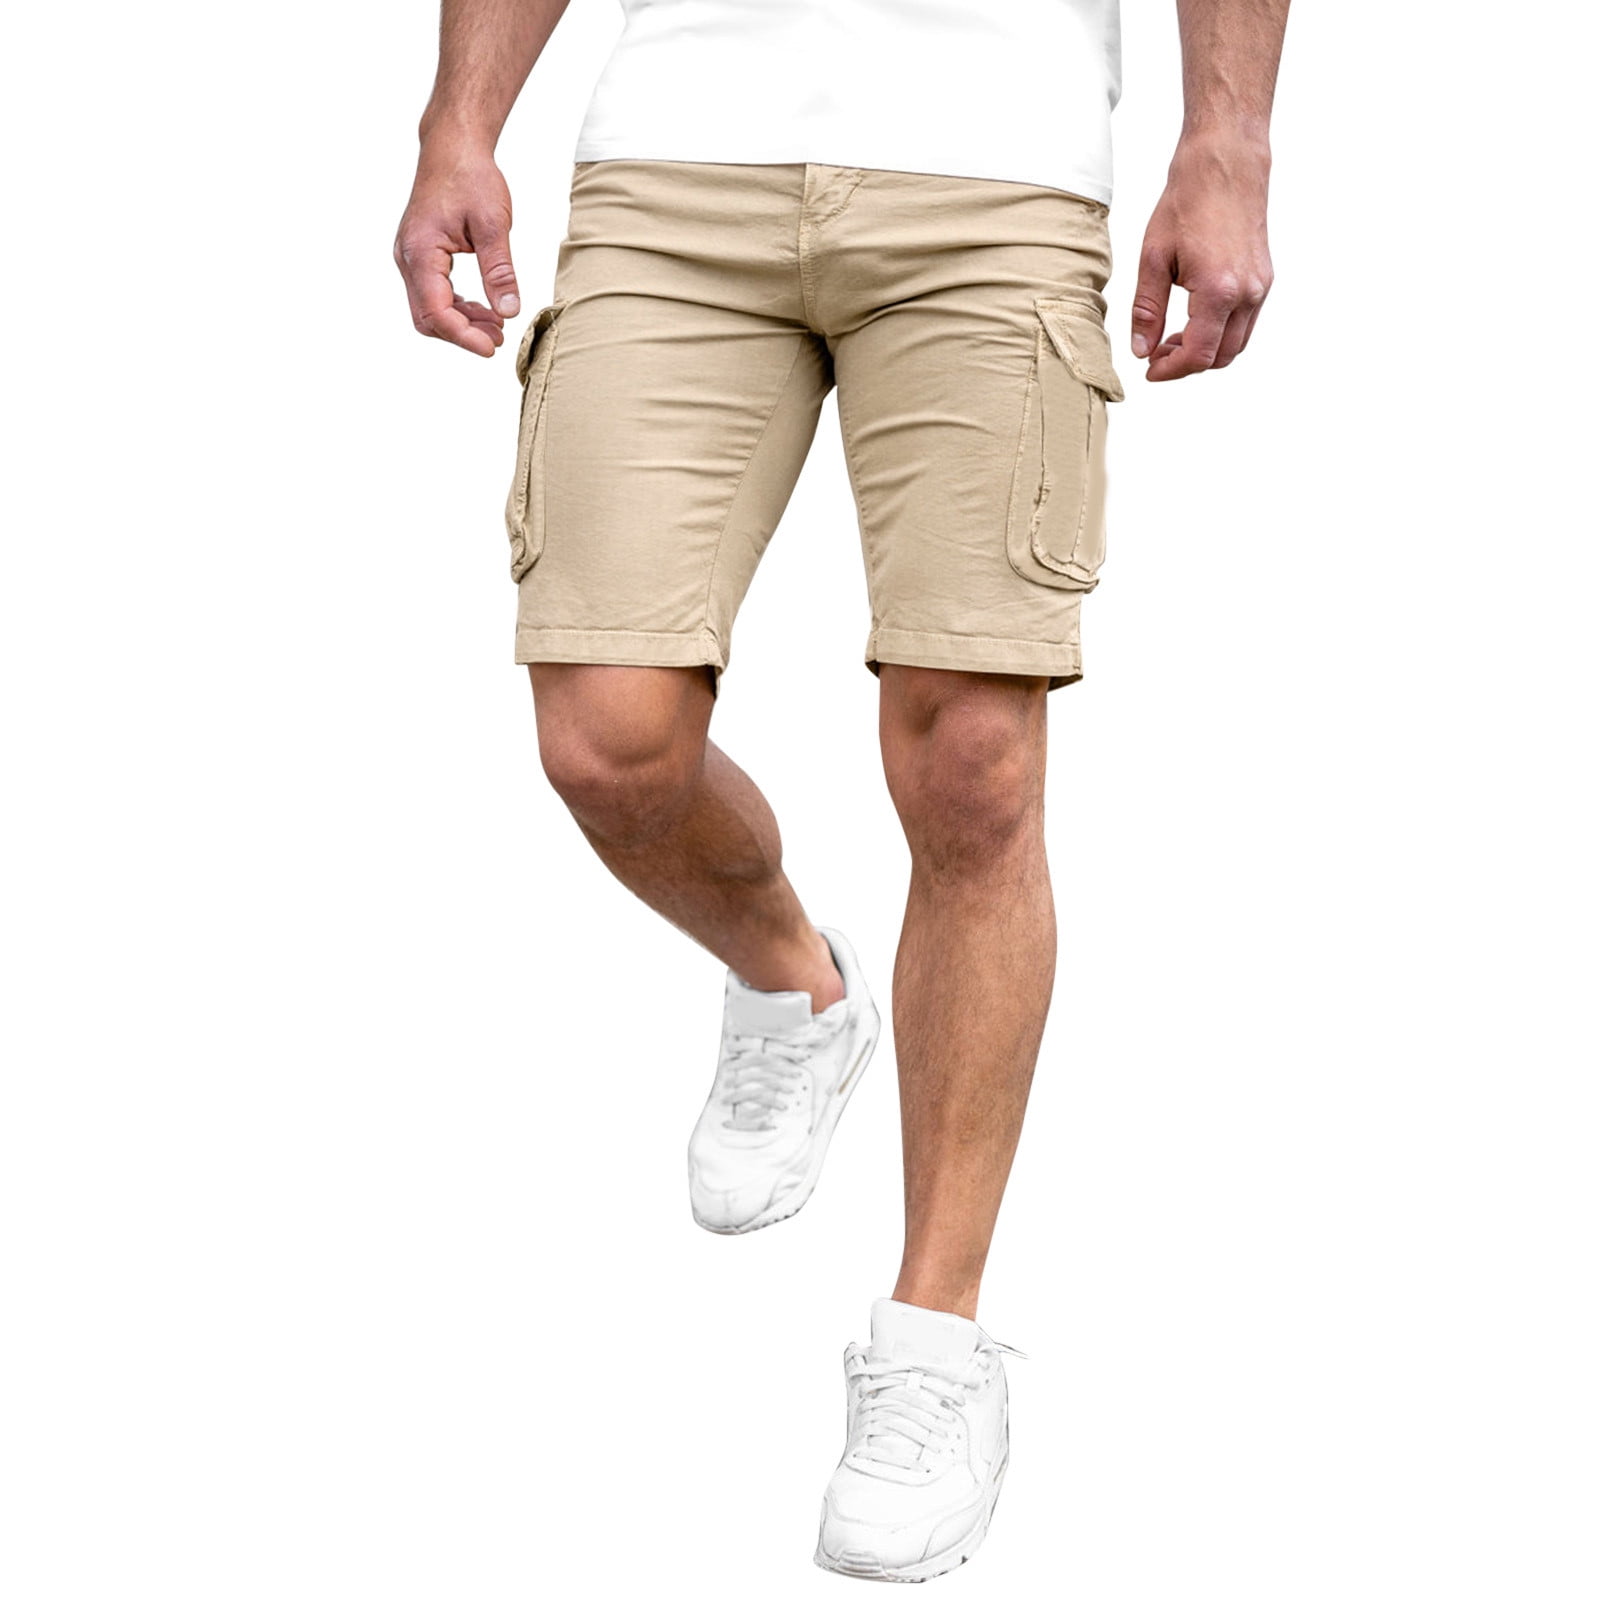 adviicd Mens Shorts 7 inch Inseam Men's Classic Fit Flat Front Stretch  Solid Chino Deck Short Mens Work Shorts